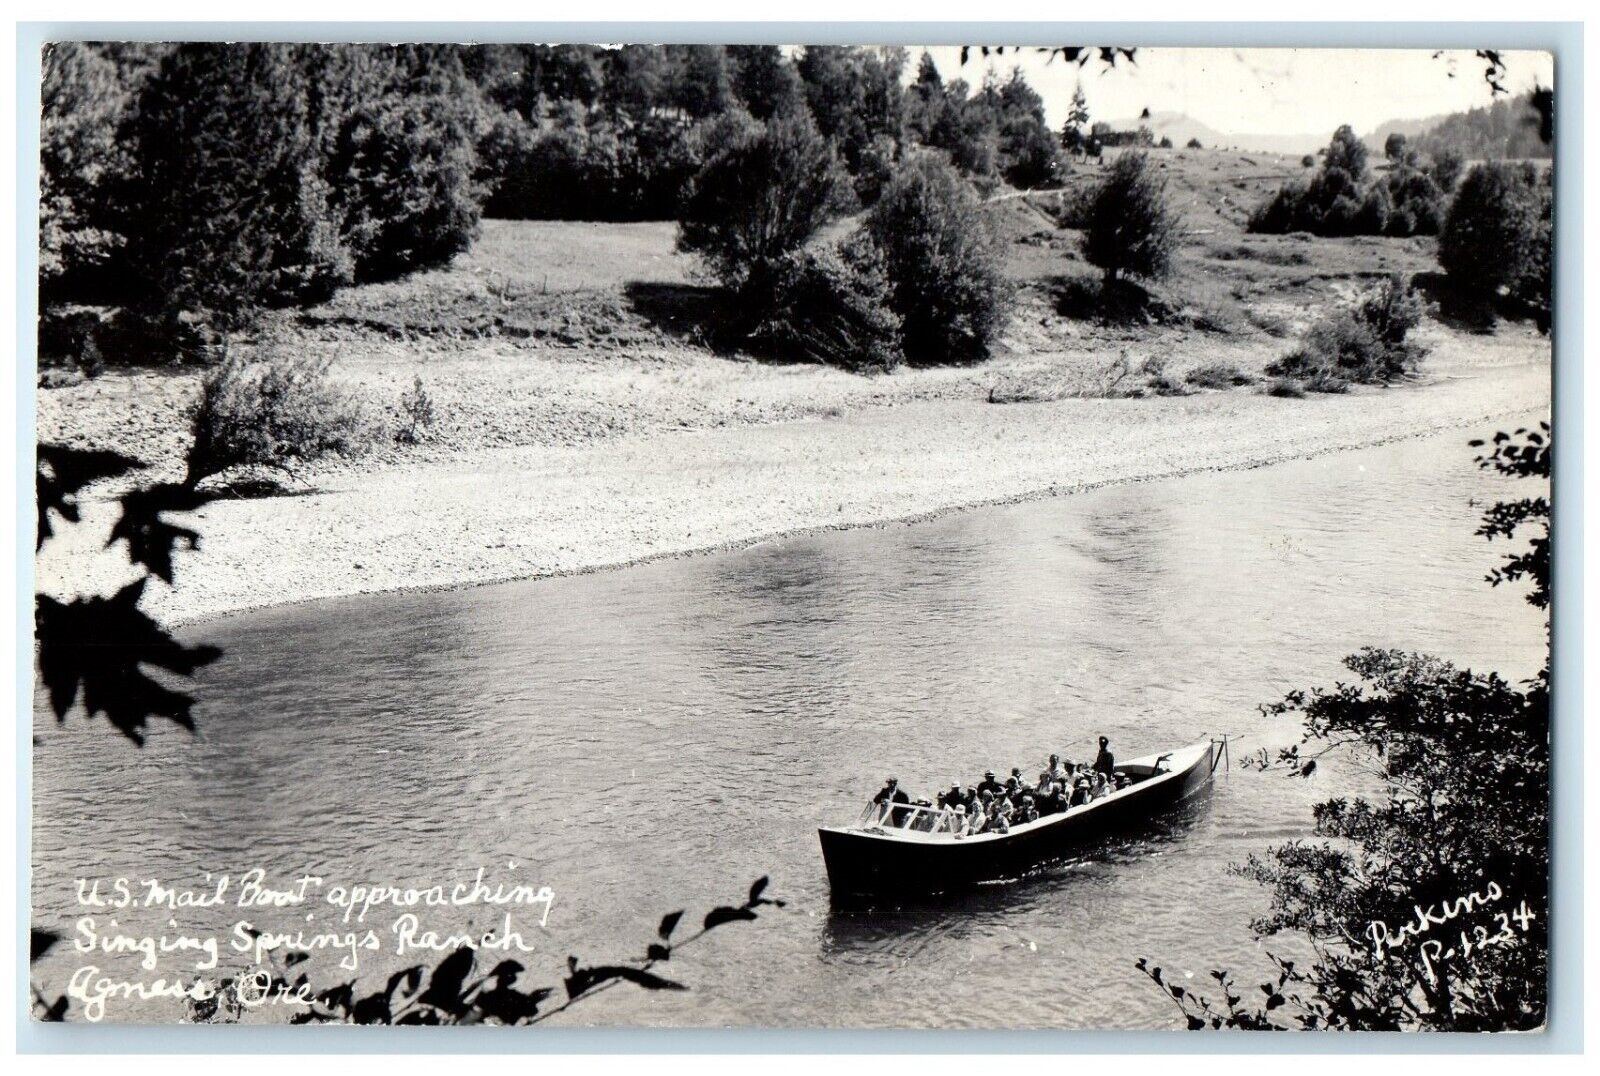 US Mail Boat Approaching Singing Springs Ranch Agness Oregon RPPC Photo Postcard